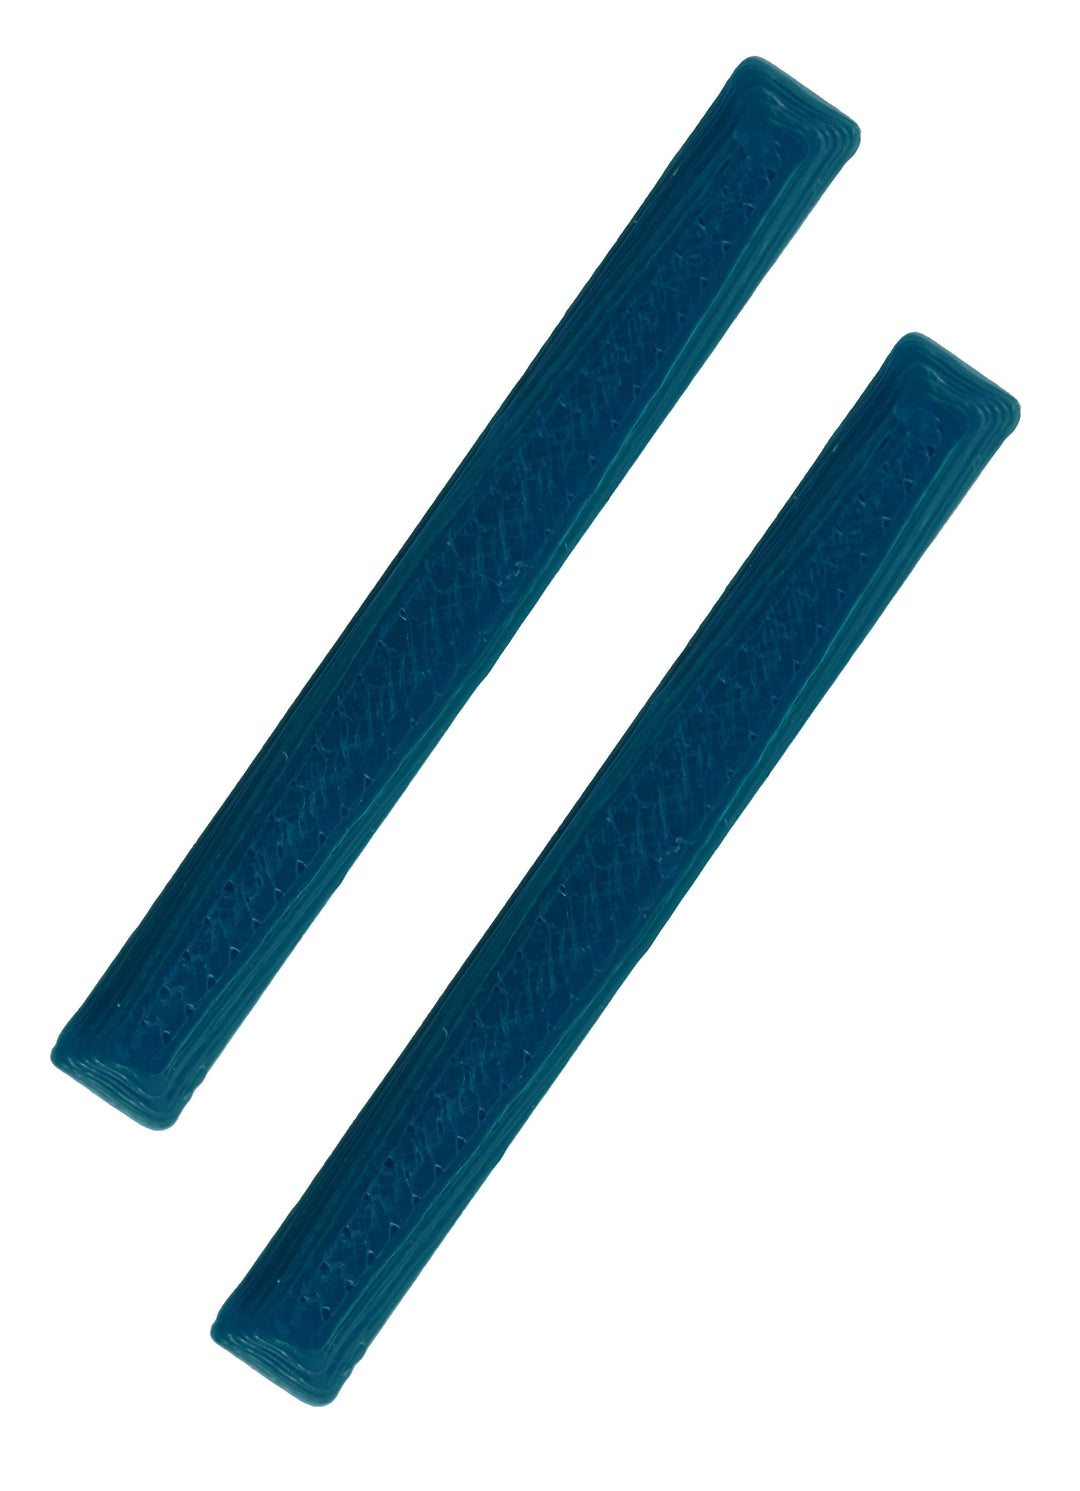 Teak Tuning Limited Edition Gem Edition Board Rails (Adhesive Backing) - Teal